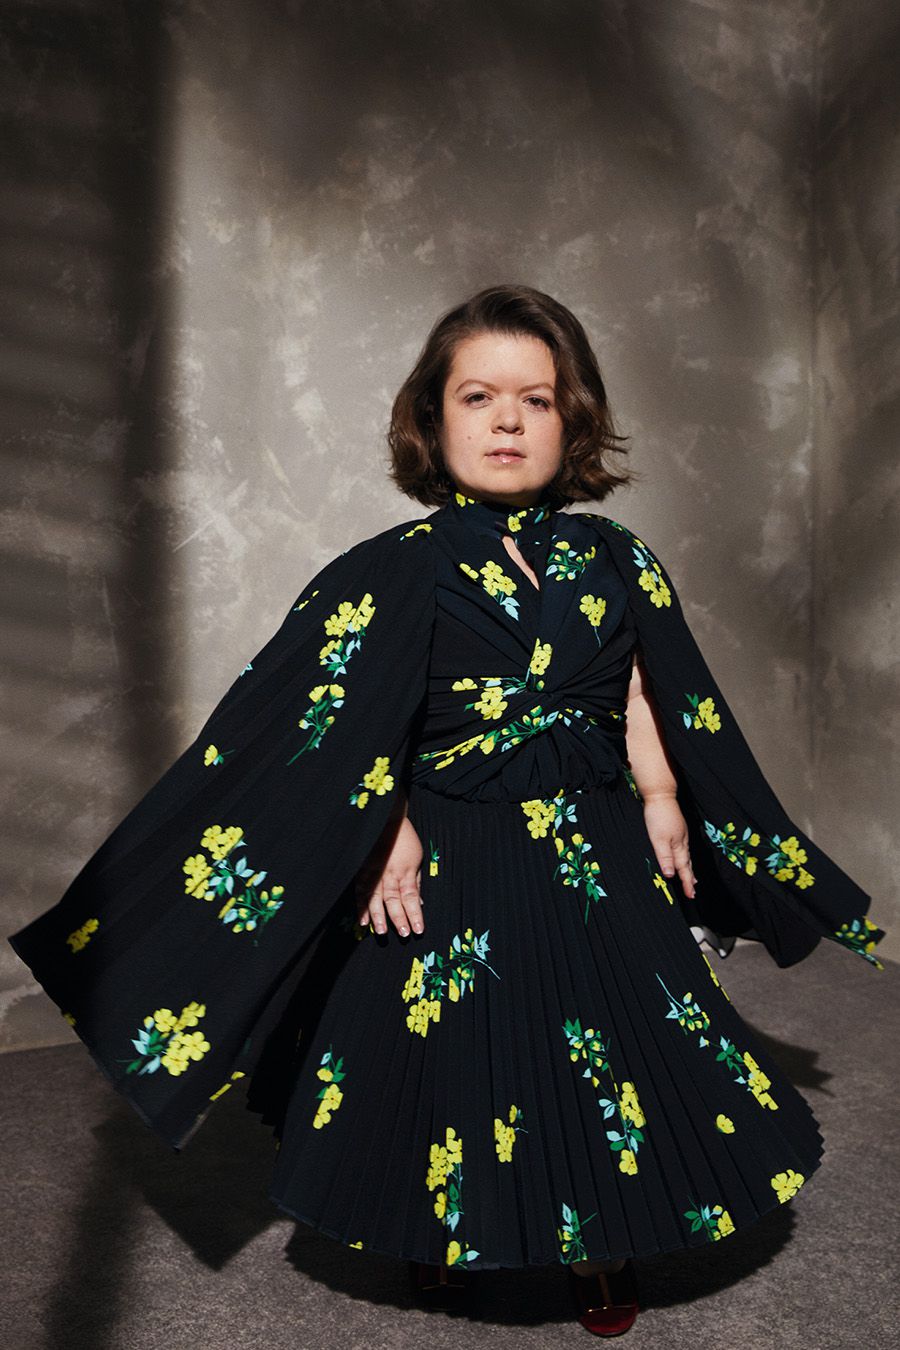 British Vogue Highlights Disability Justice